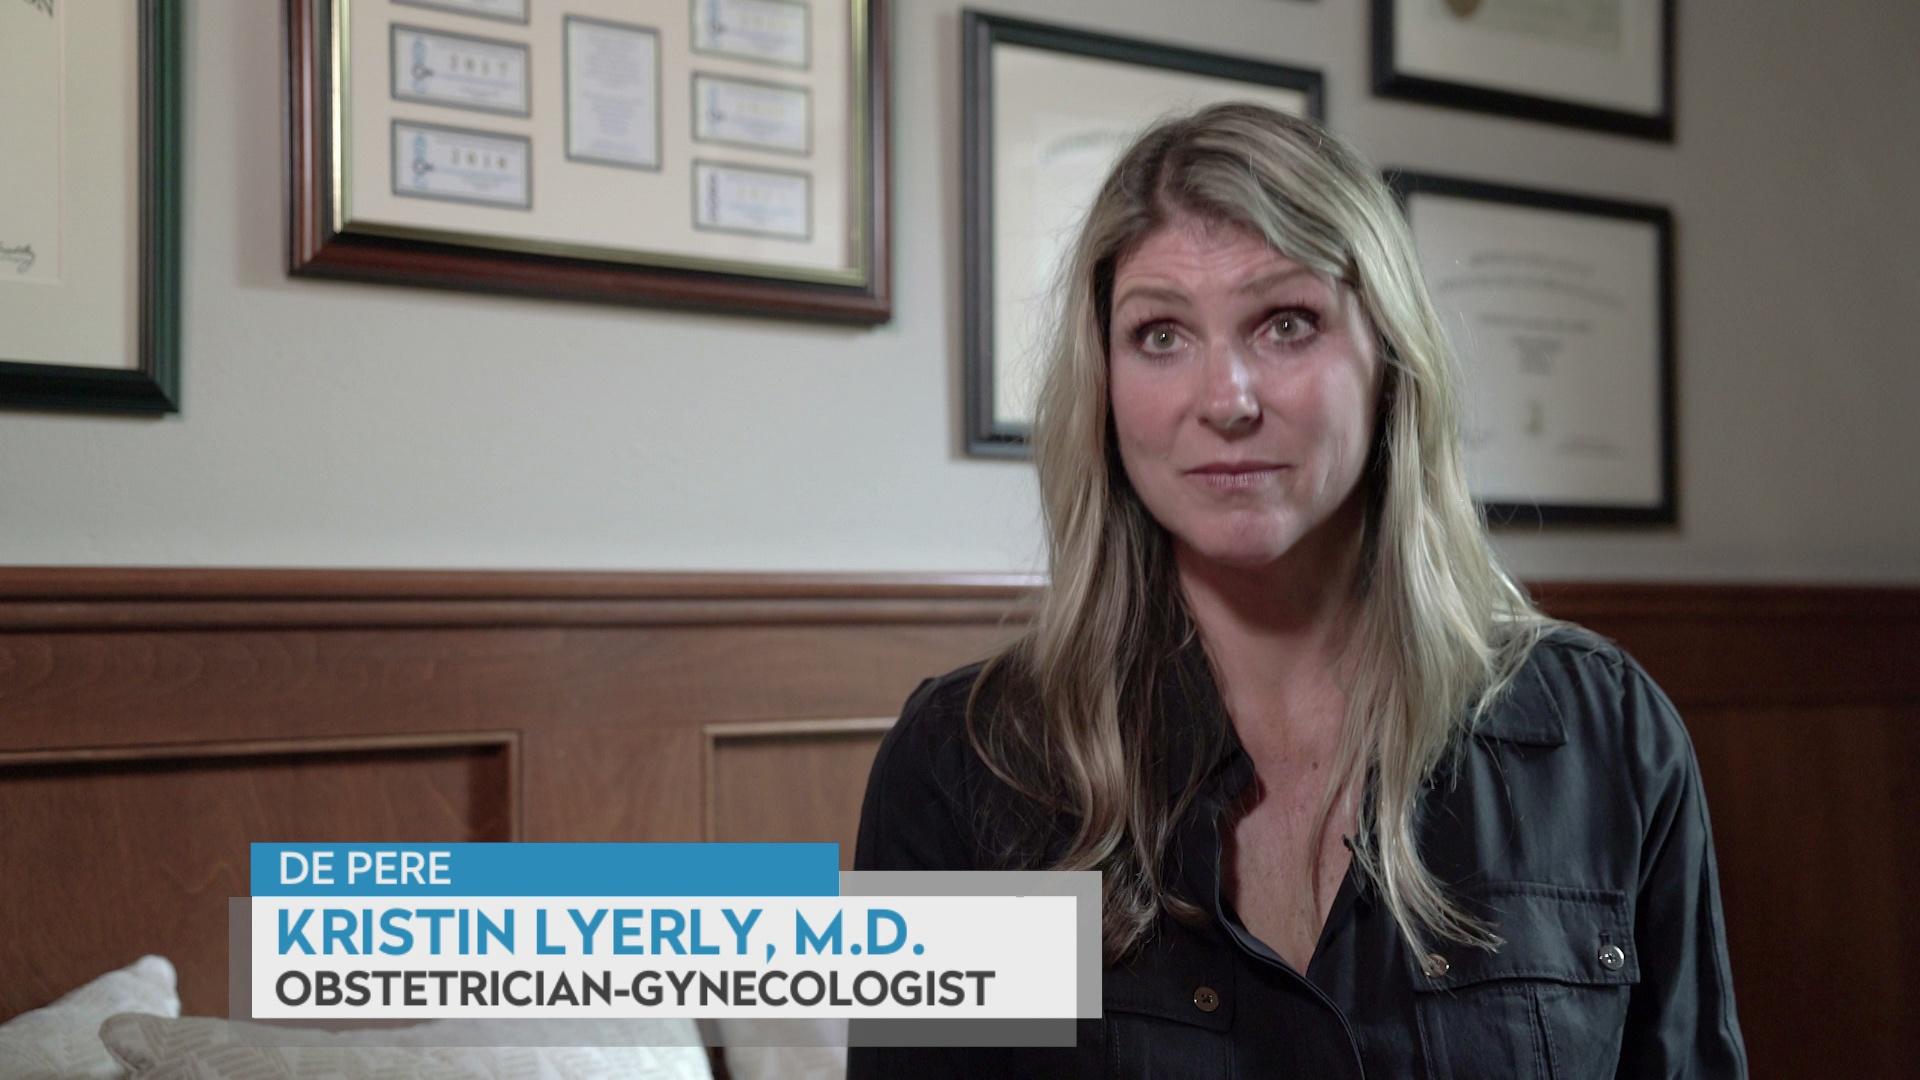 Dr. Kristin Lyerly on health care and defining abortion